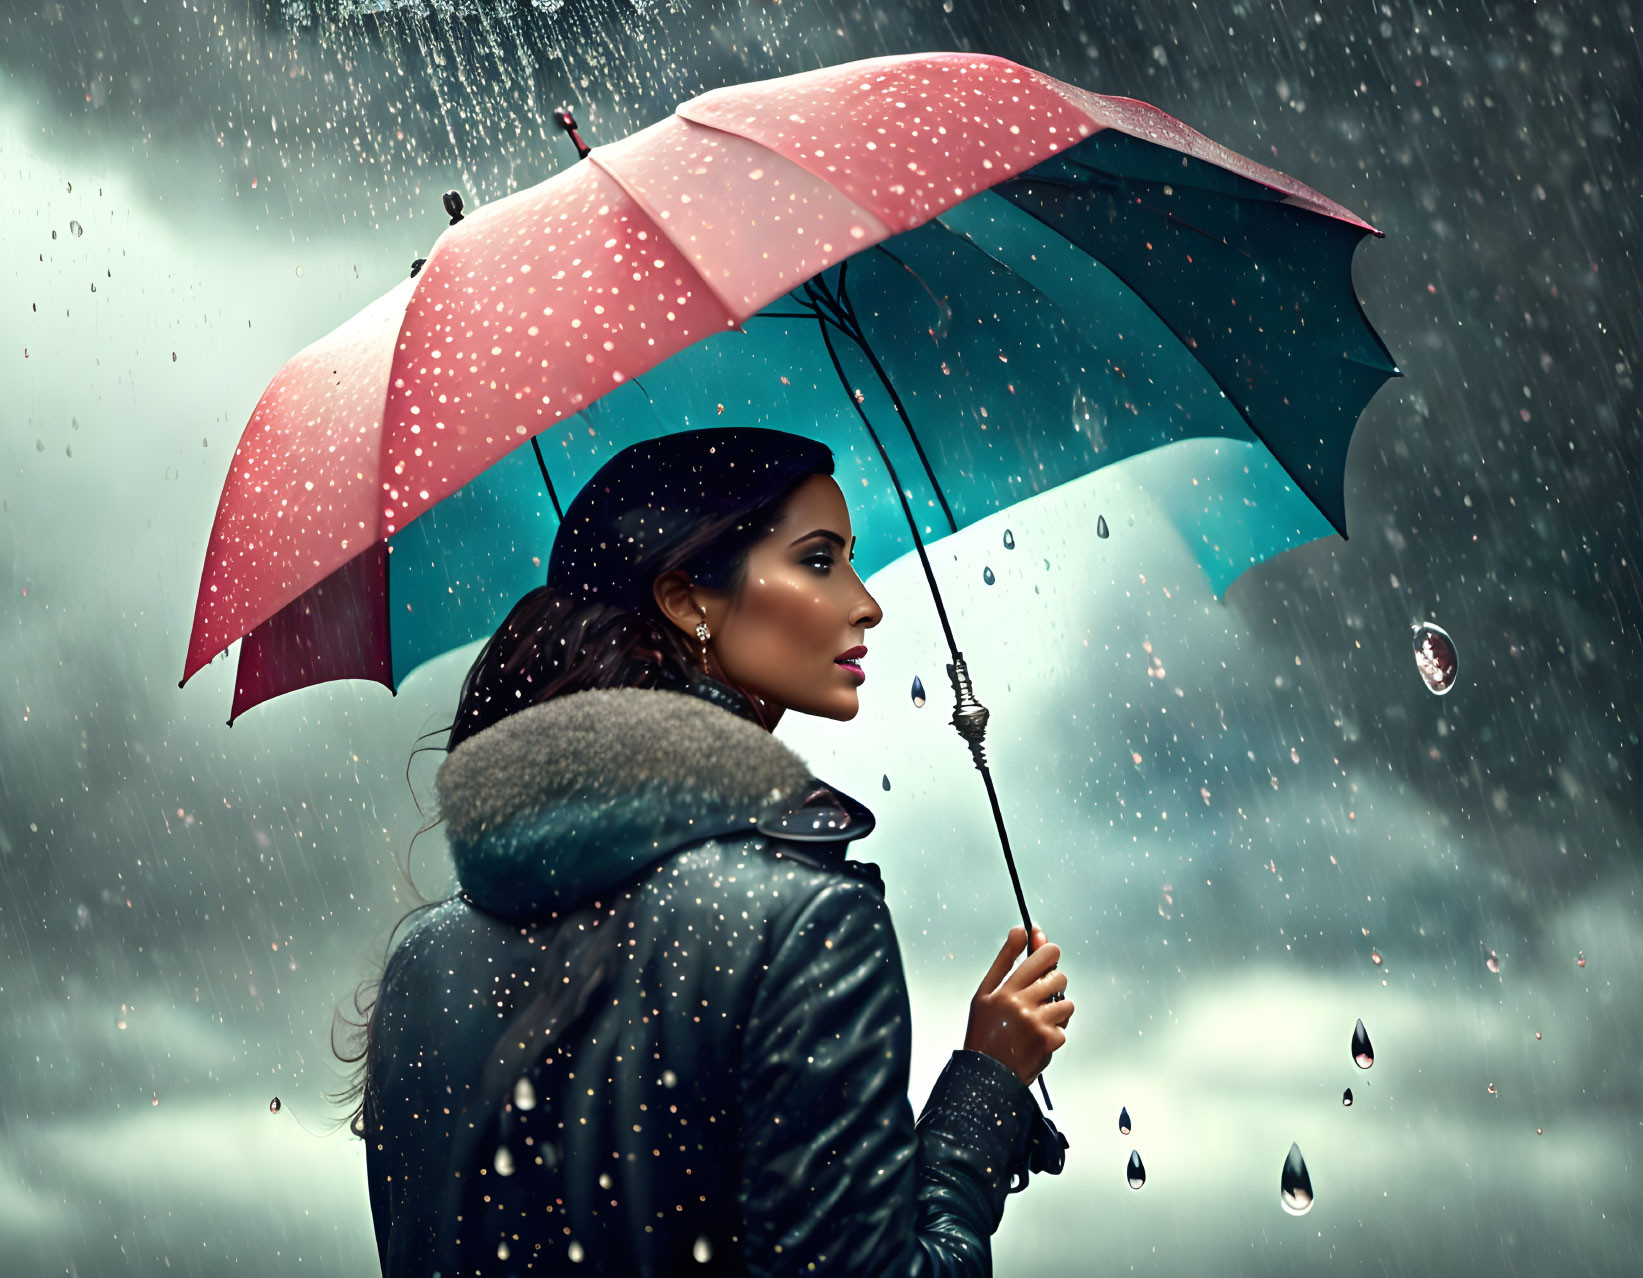 Colorful umbrella-wielding woman in the rain with water droplets